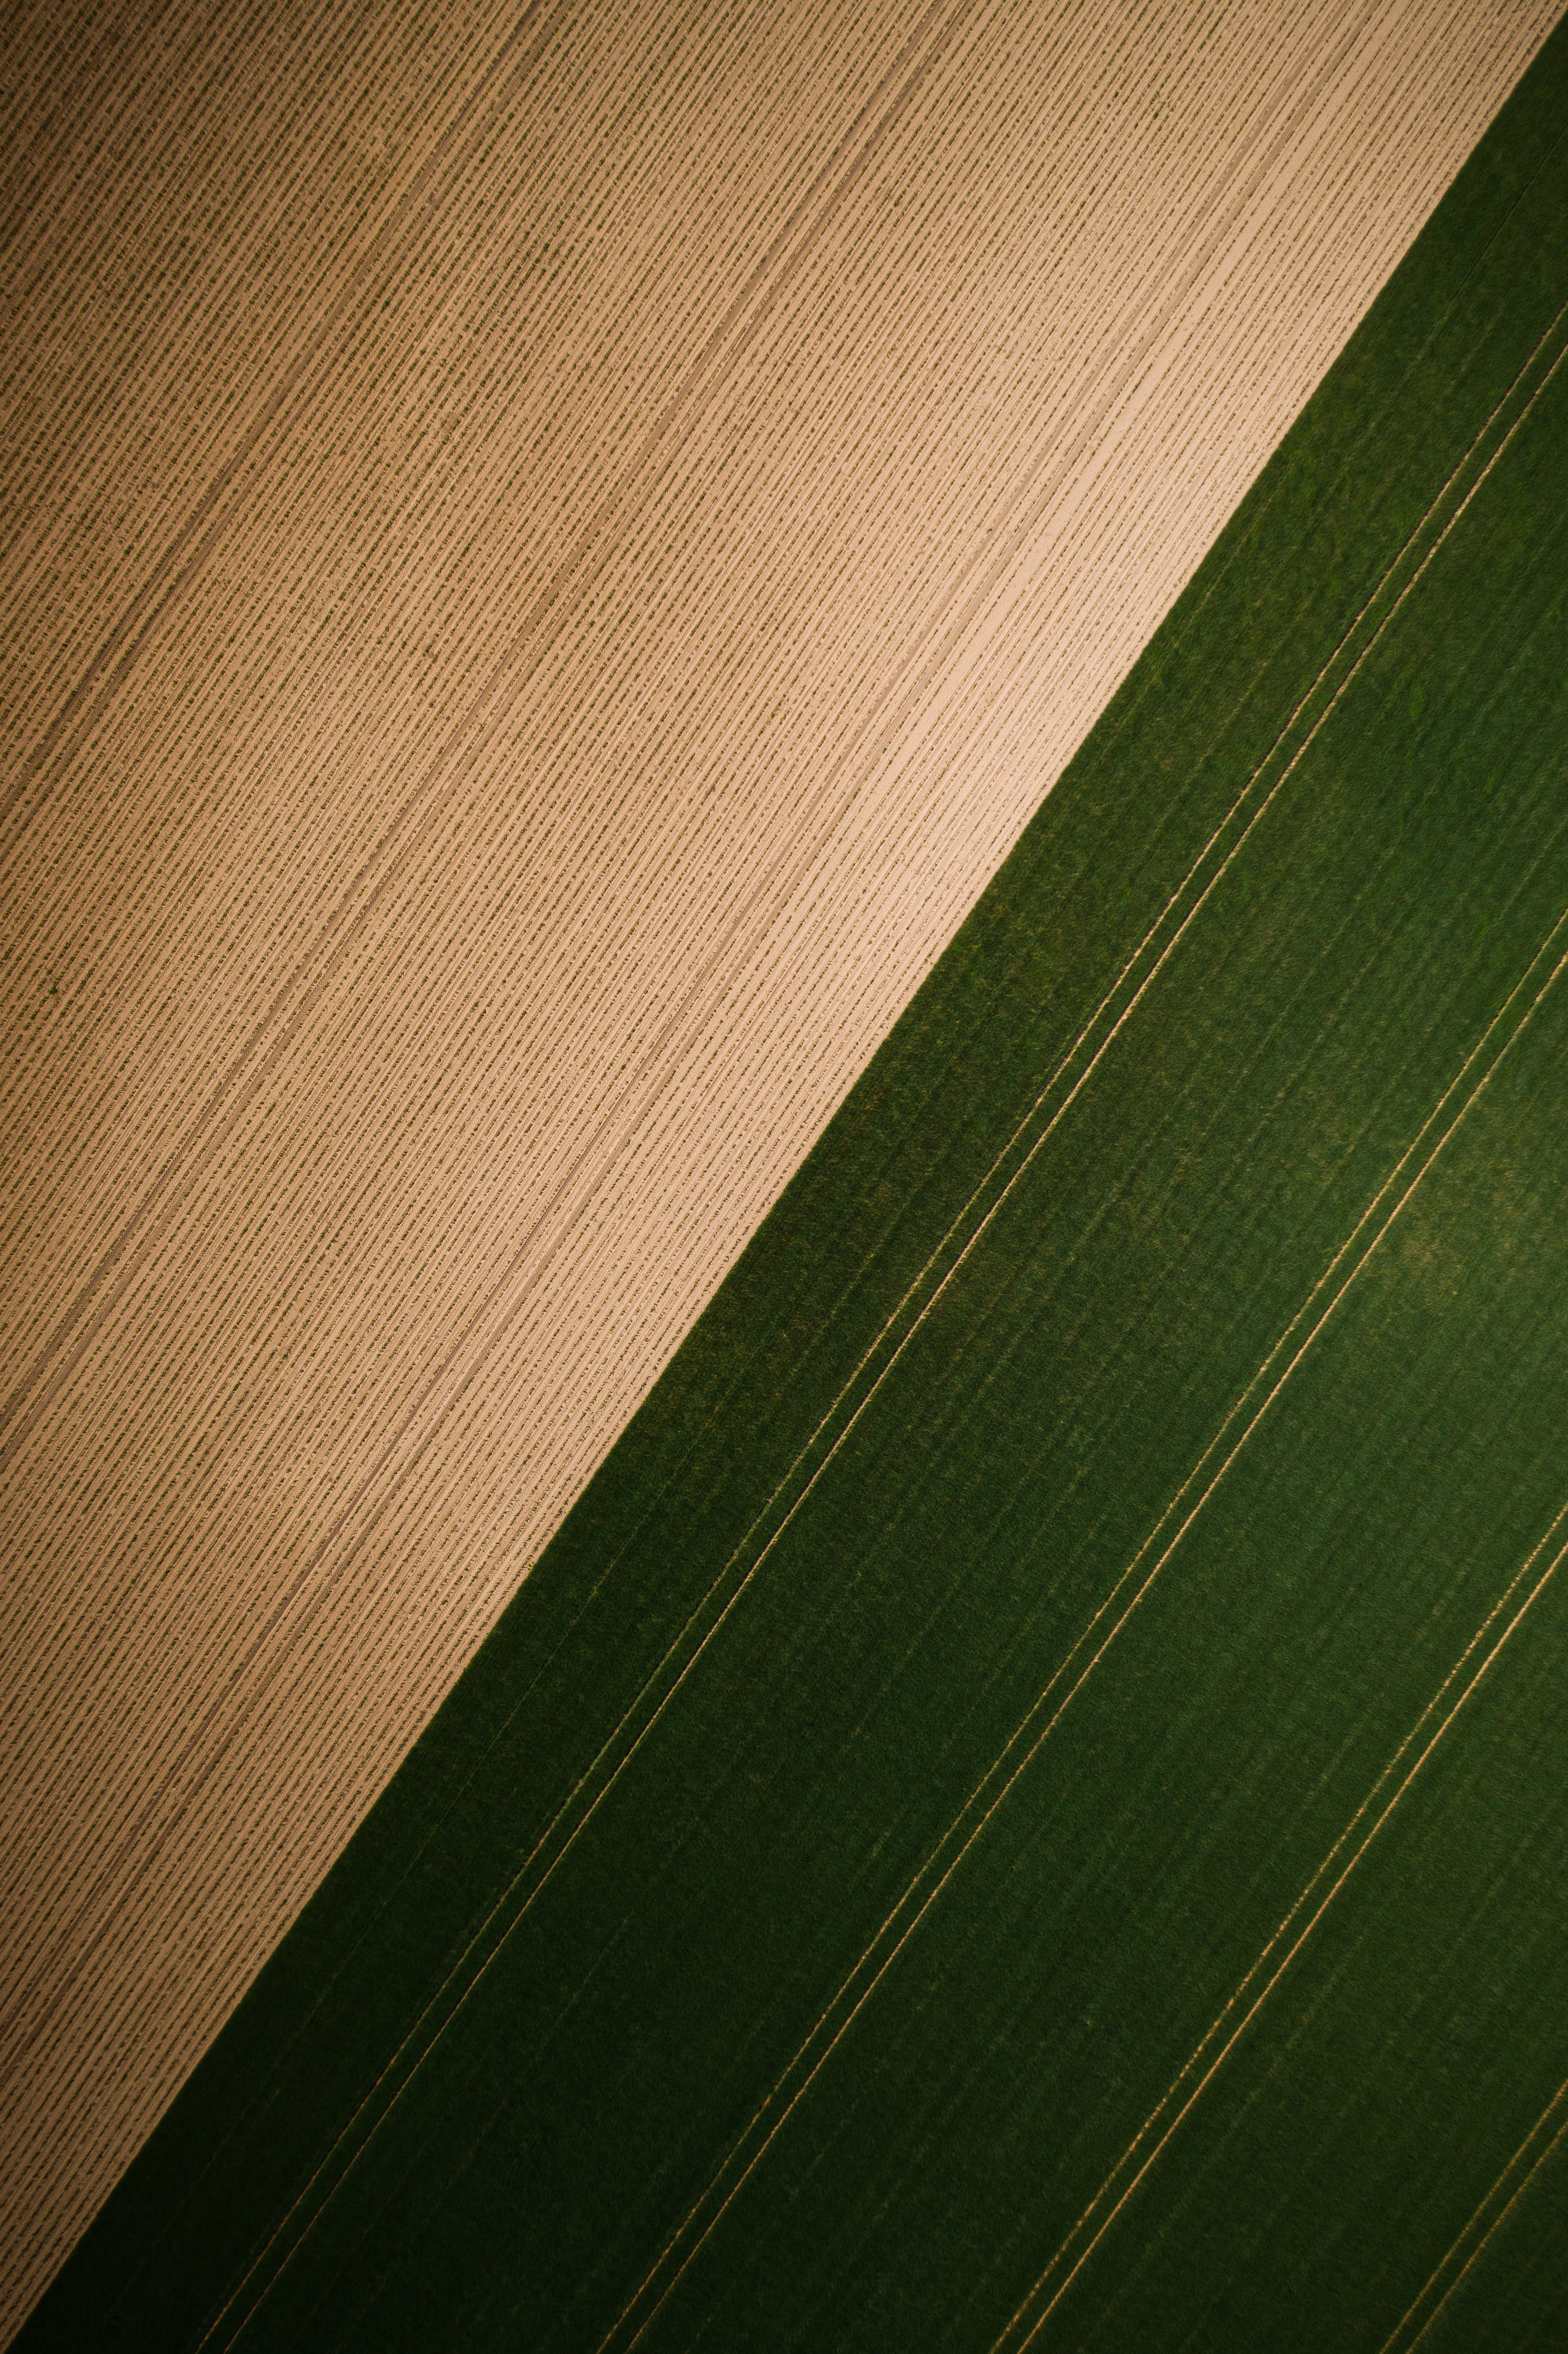 streaks, stripes, textures, grass, view from above, texture, field HD wallpaper